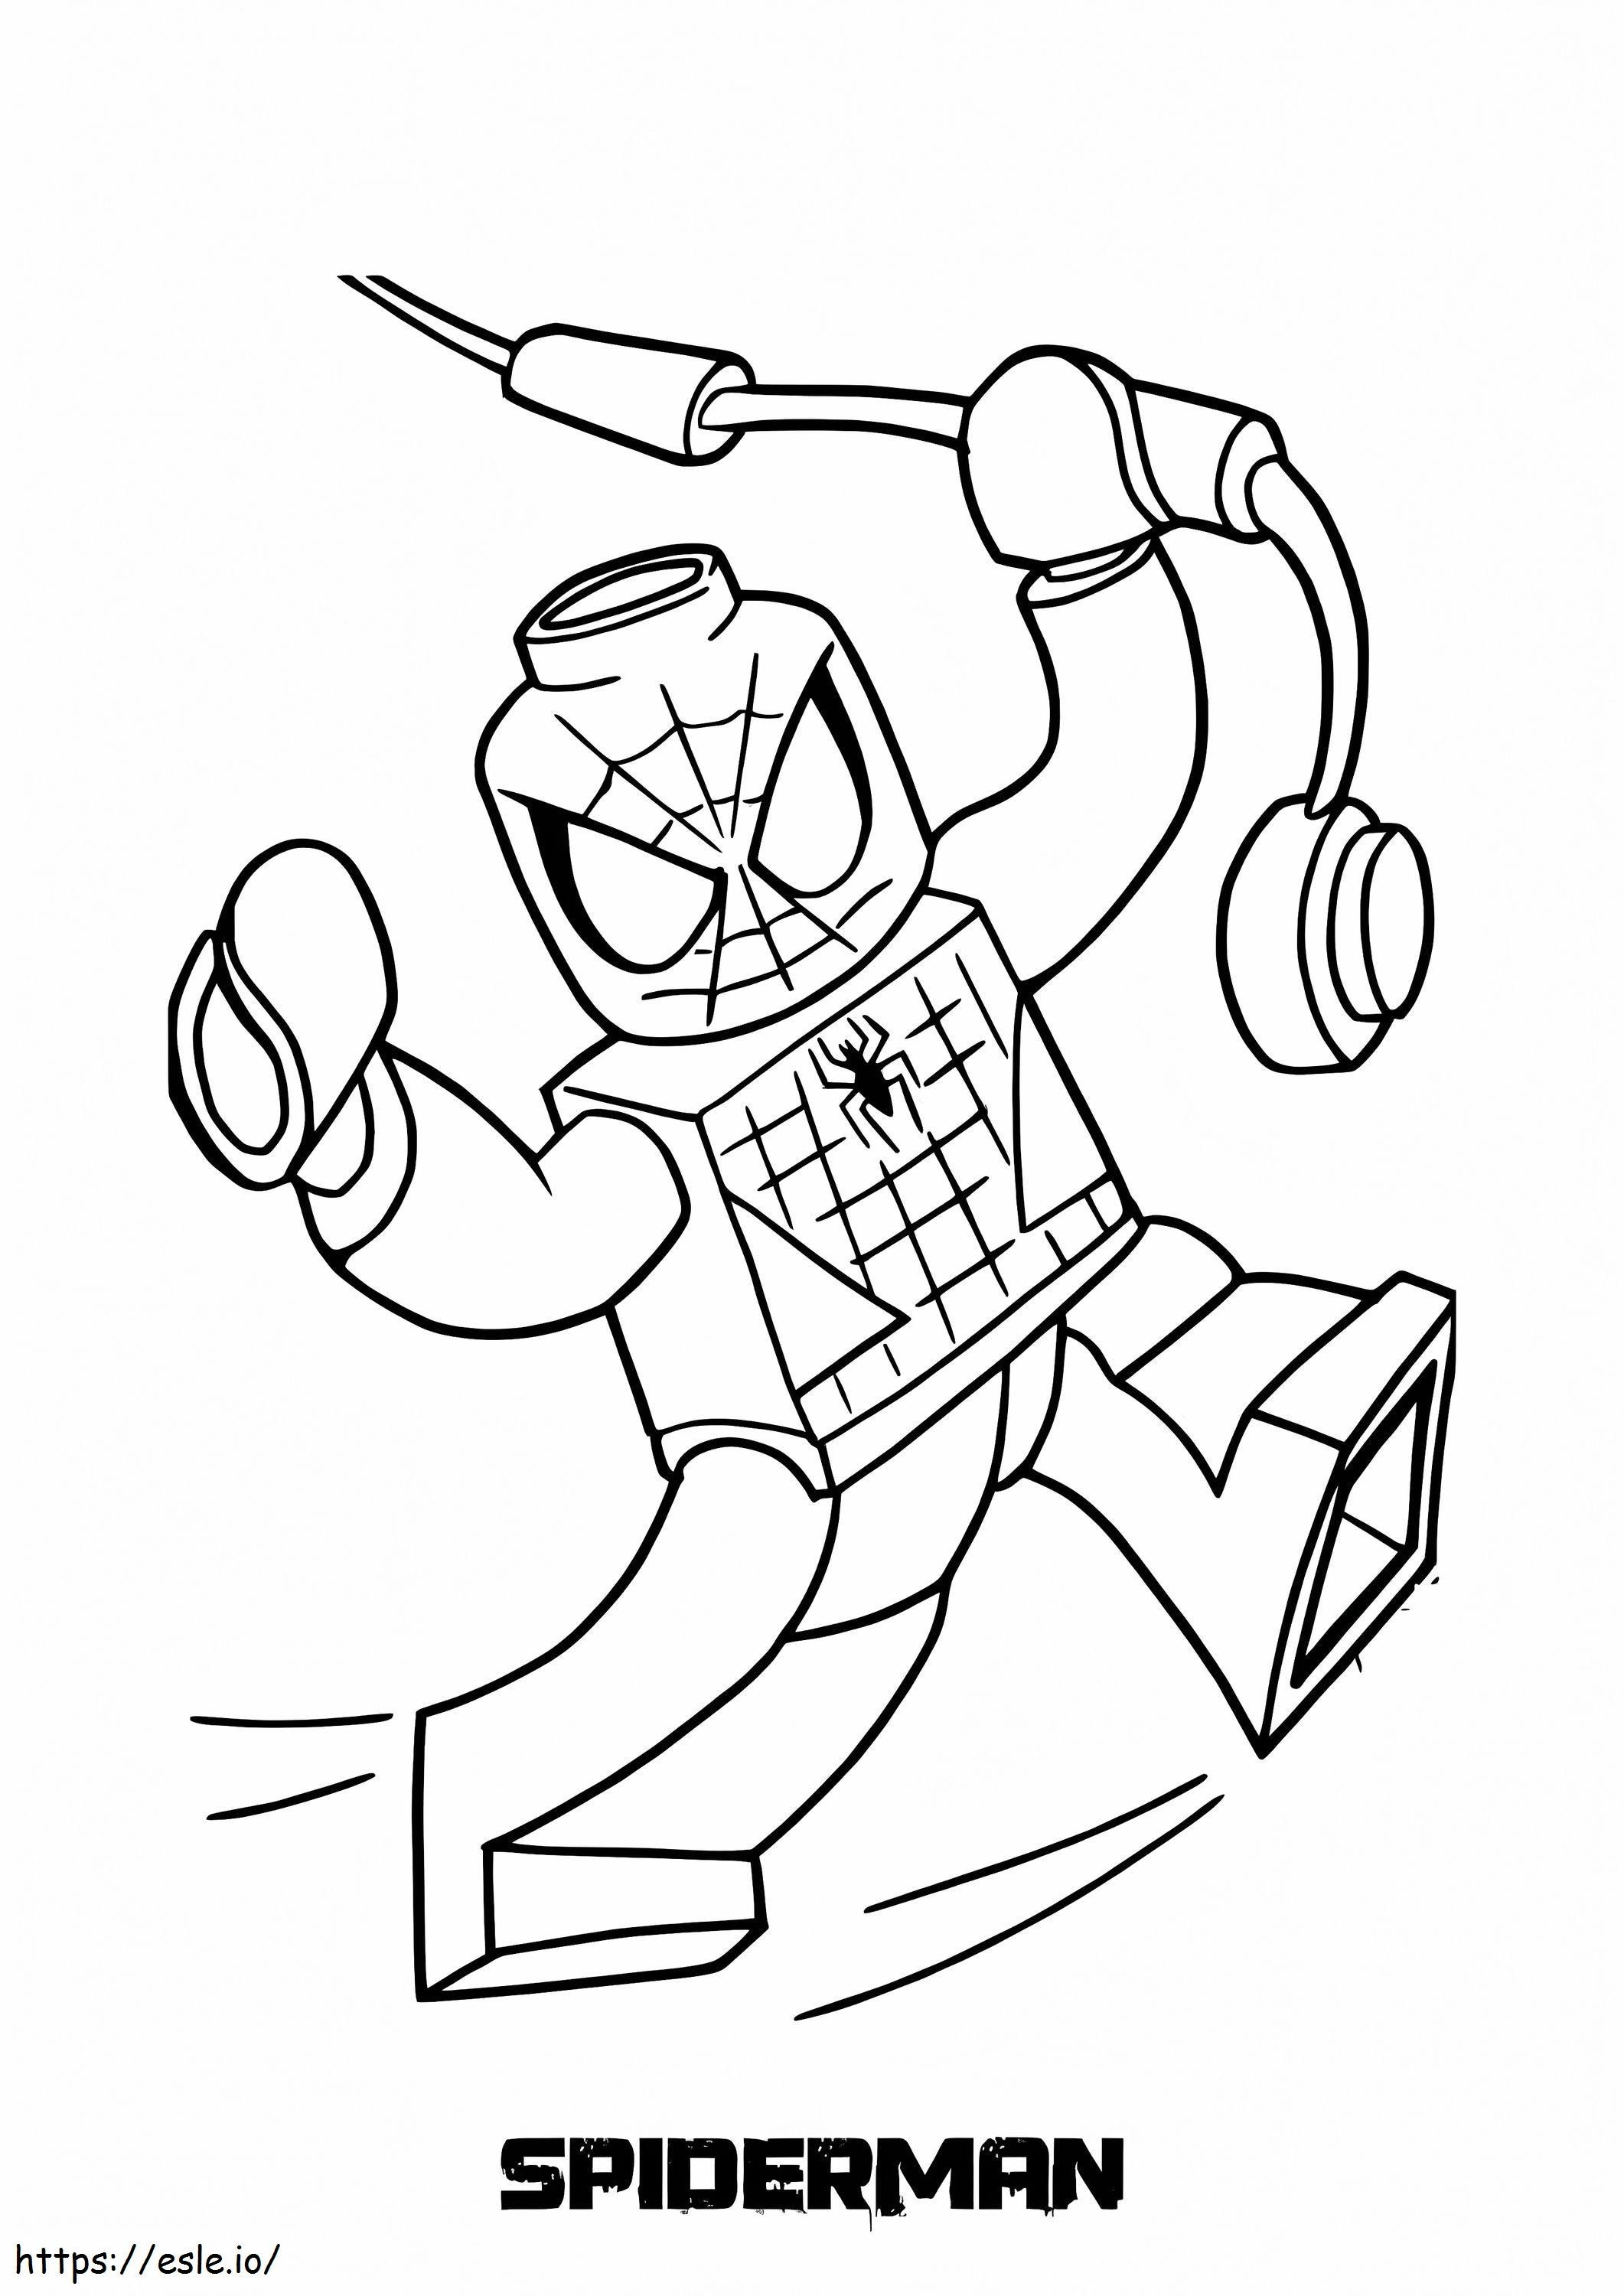 Lego Spiderman 1 coloring page